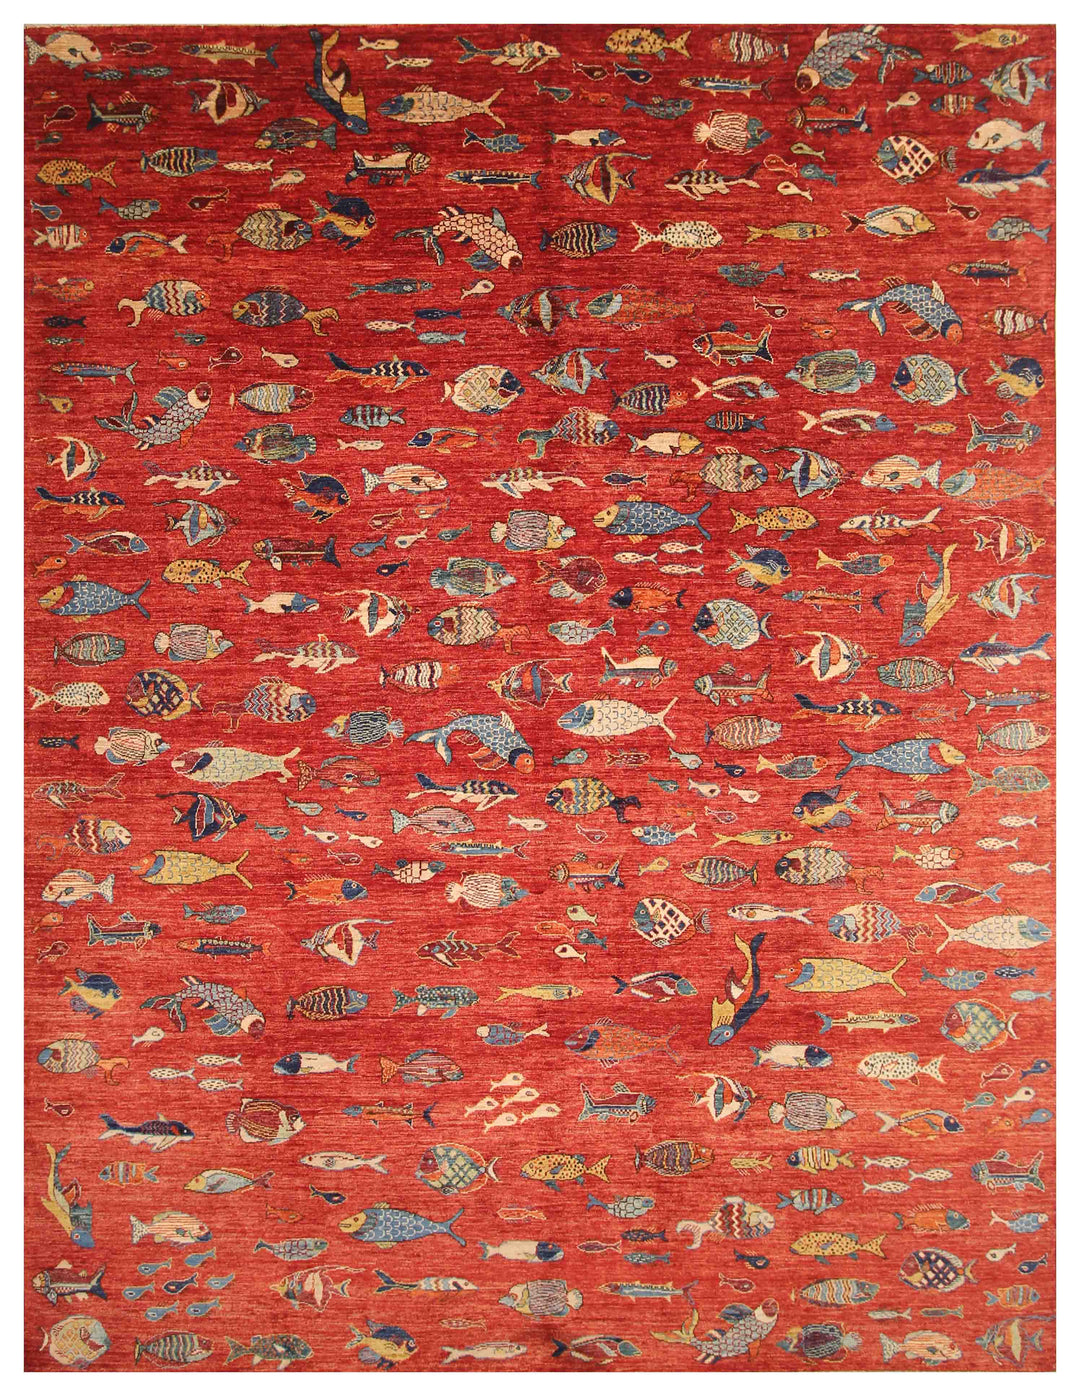 9x12 Fish Gabbeh Rusty Red Afghan Hand knotted Rug